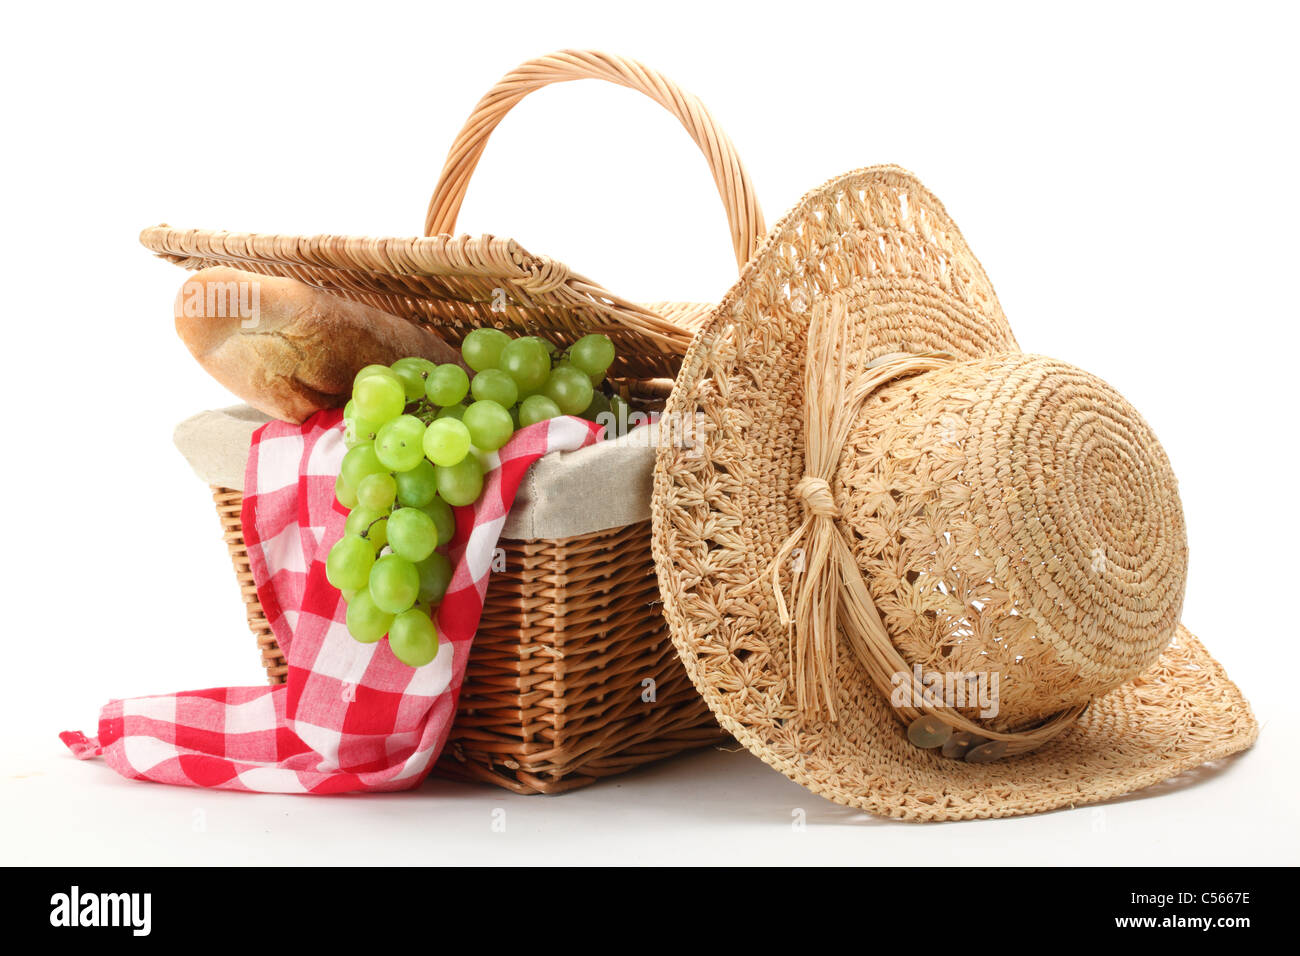 https://c8.alamy.com/comp/C5667E/picnic-basket-and-straw-hat-isolated-on-white-background-C5667E.jpg